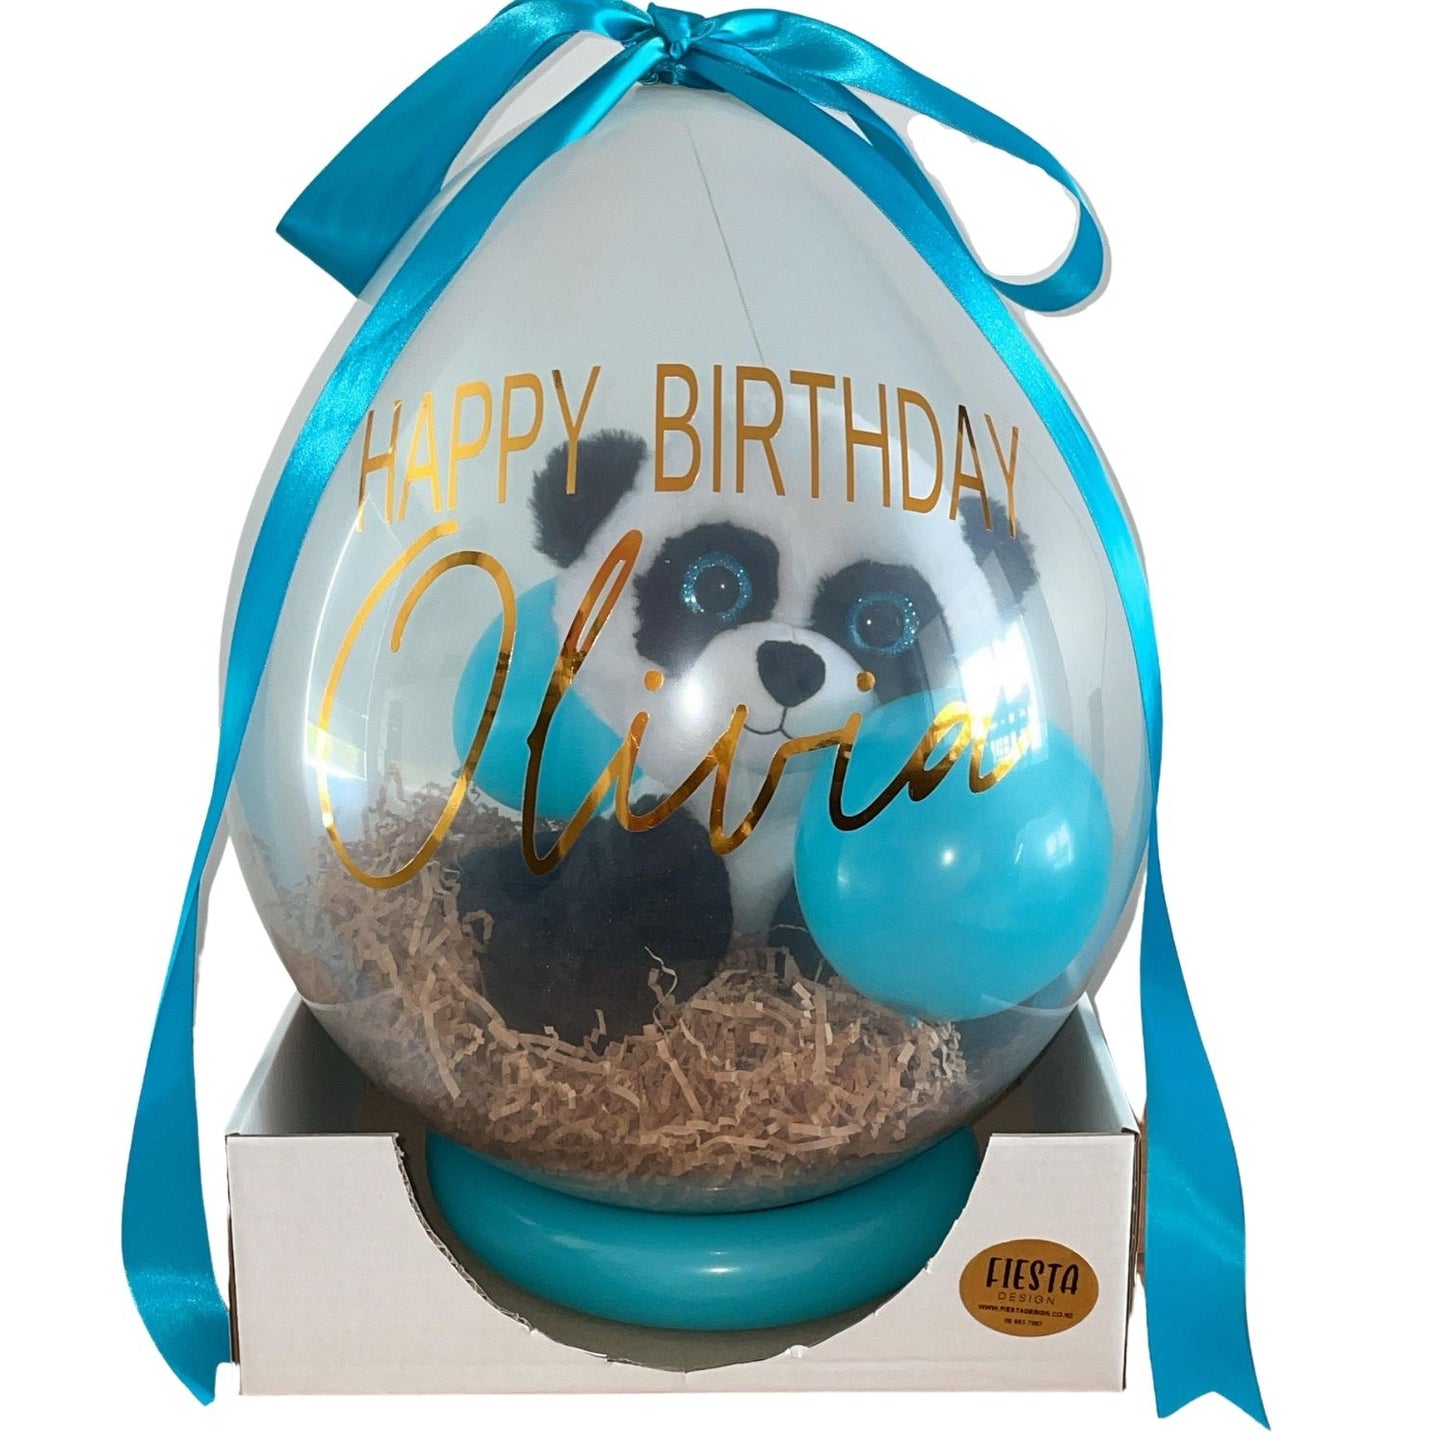 Pick & Choose your Own Gifts - Stuffed Balloon Hamper - See Add-Ons